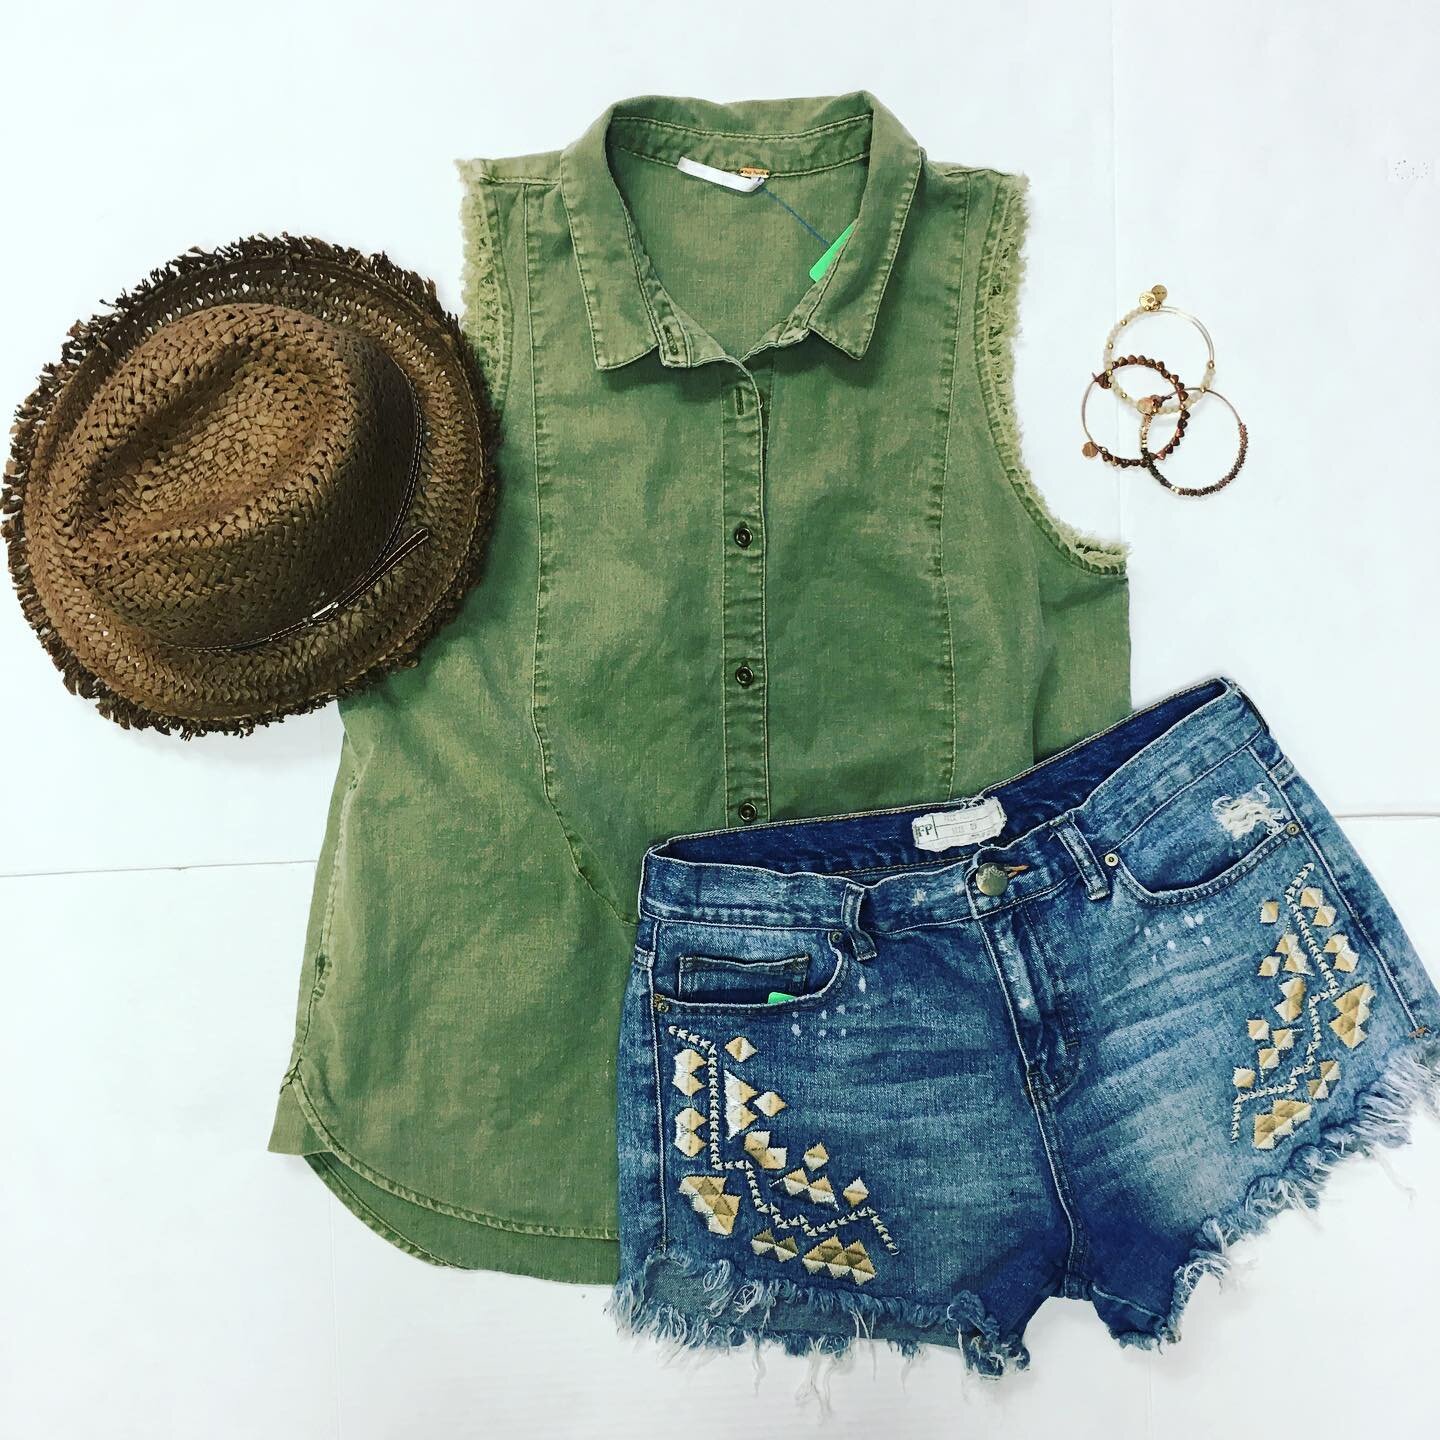 Free People ❤️

Olive Green Linen Blend Top Medium $32
Embroidered Shorts Size 29 $35
Alex &amp; Ani Bracelets $10 each
Chaos Hat S/M $10

#wildflowersconsignmentboutique #consignmentboutique #consignment #preloved #sustainablefashion #secondhandfirs